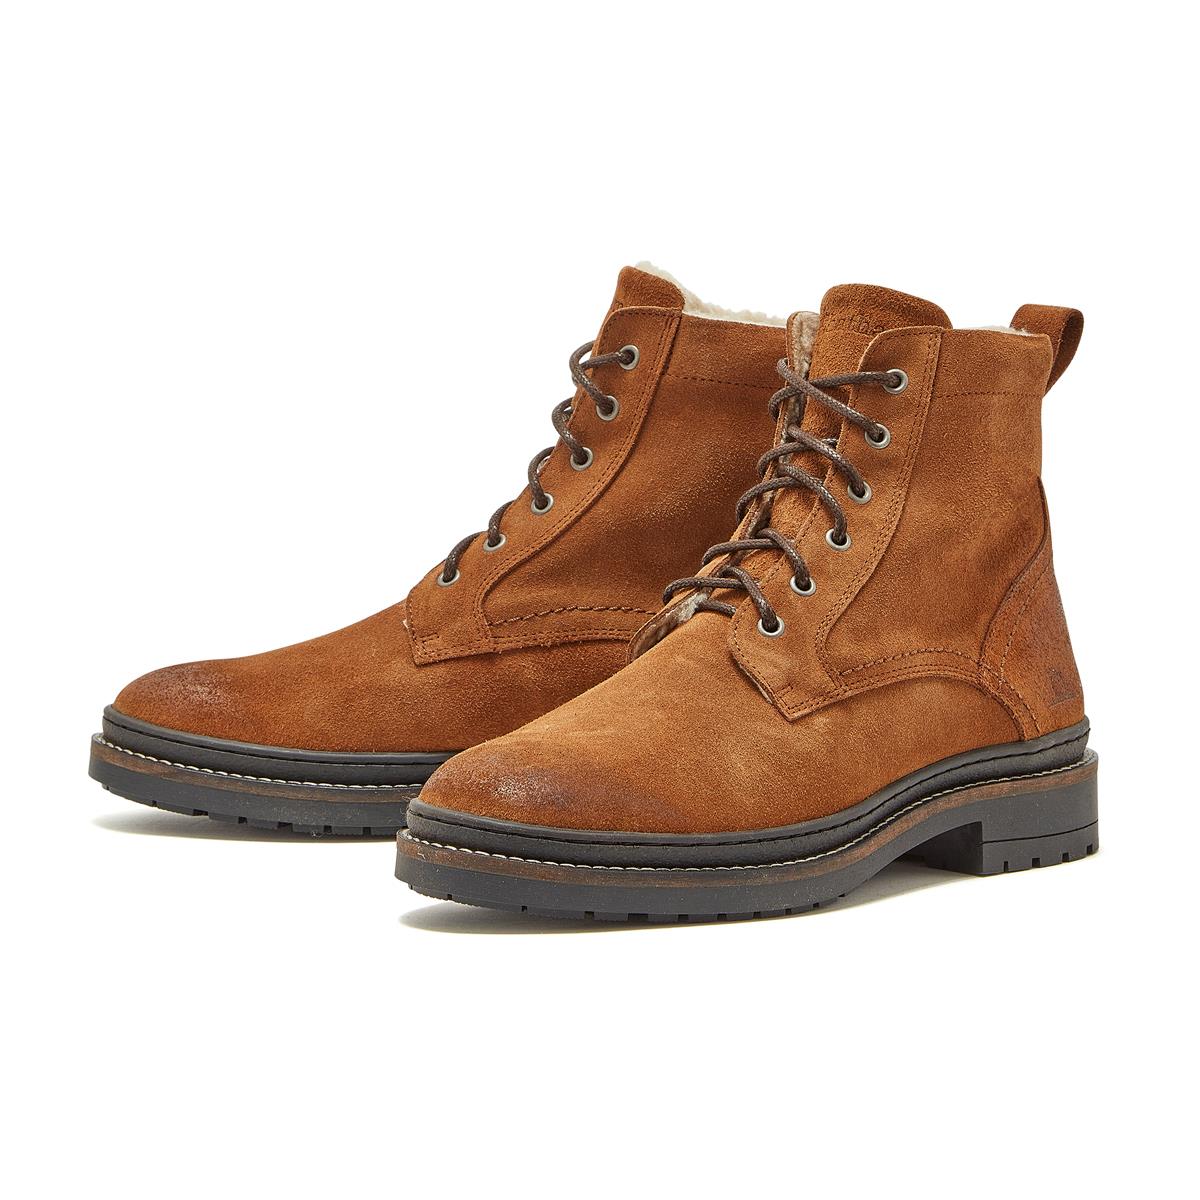 When will the size 6 of Chatham Mens Endsleigh Boot be restocked?